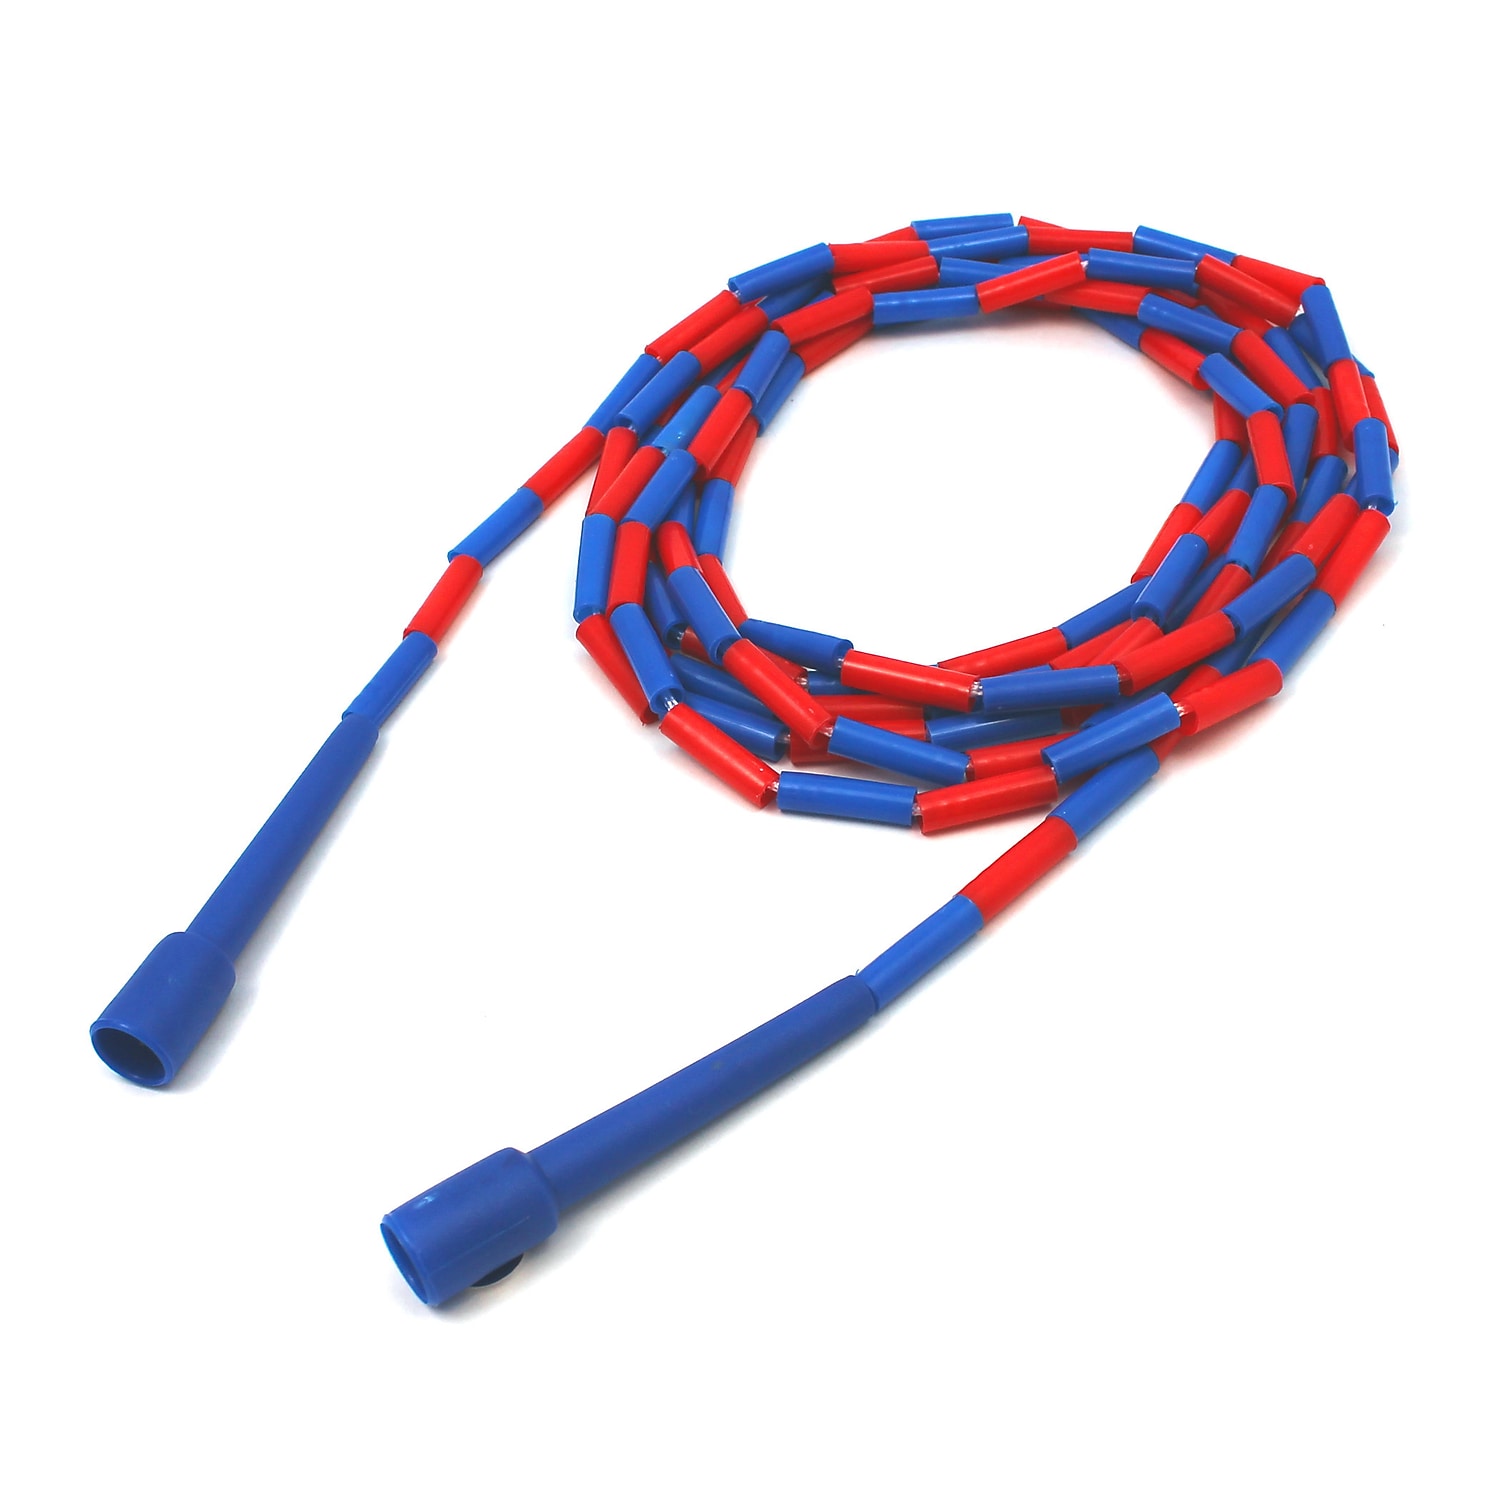 Dick Martin Sports Dick Plastic Jump Rope 16 Sections 4 EA/BD MASJR16 - image 1 of 2